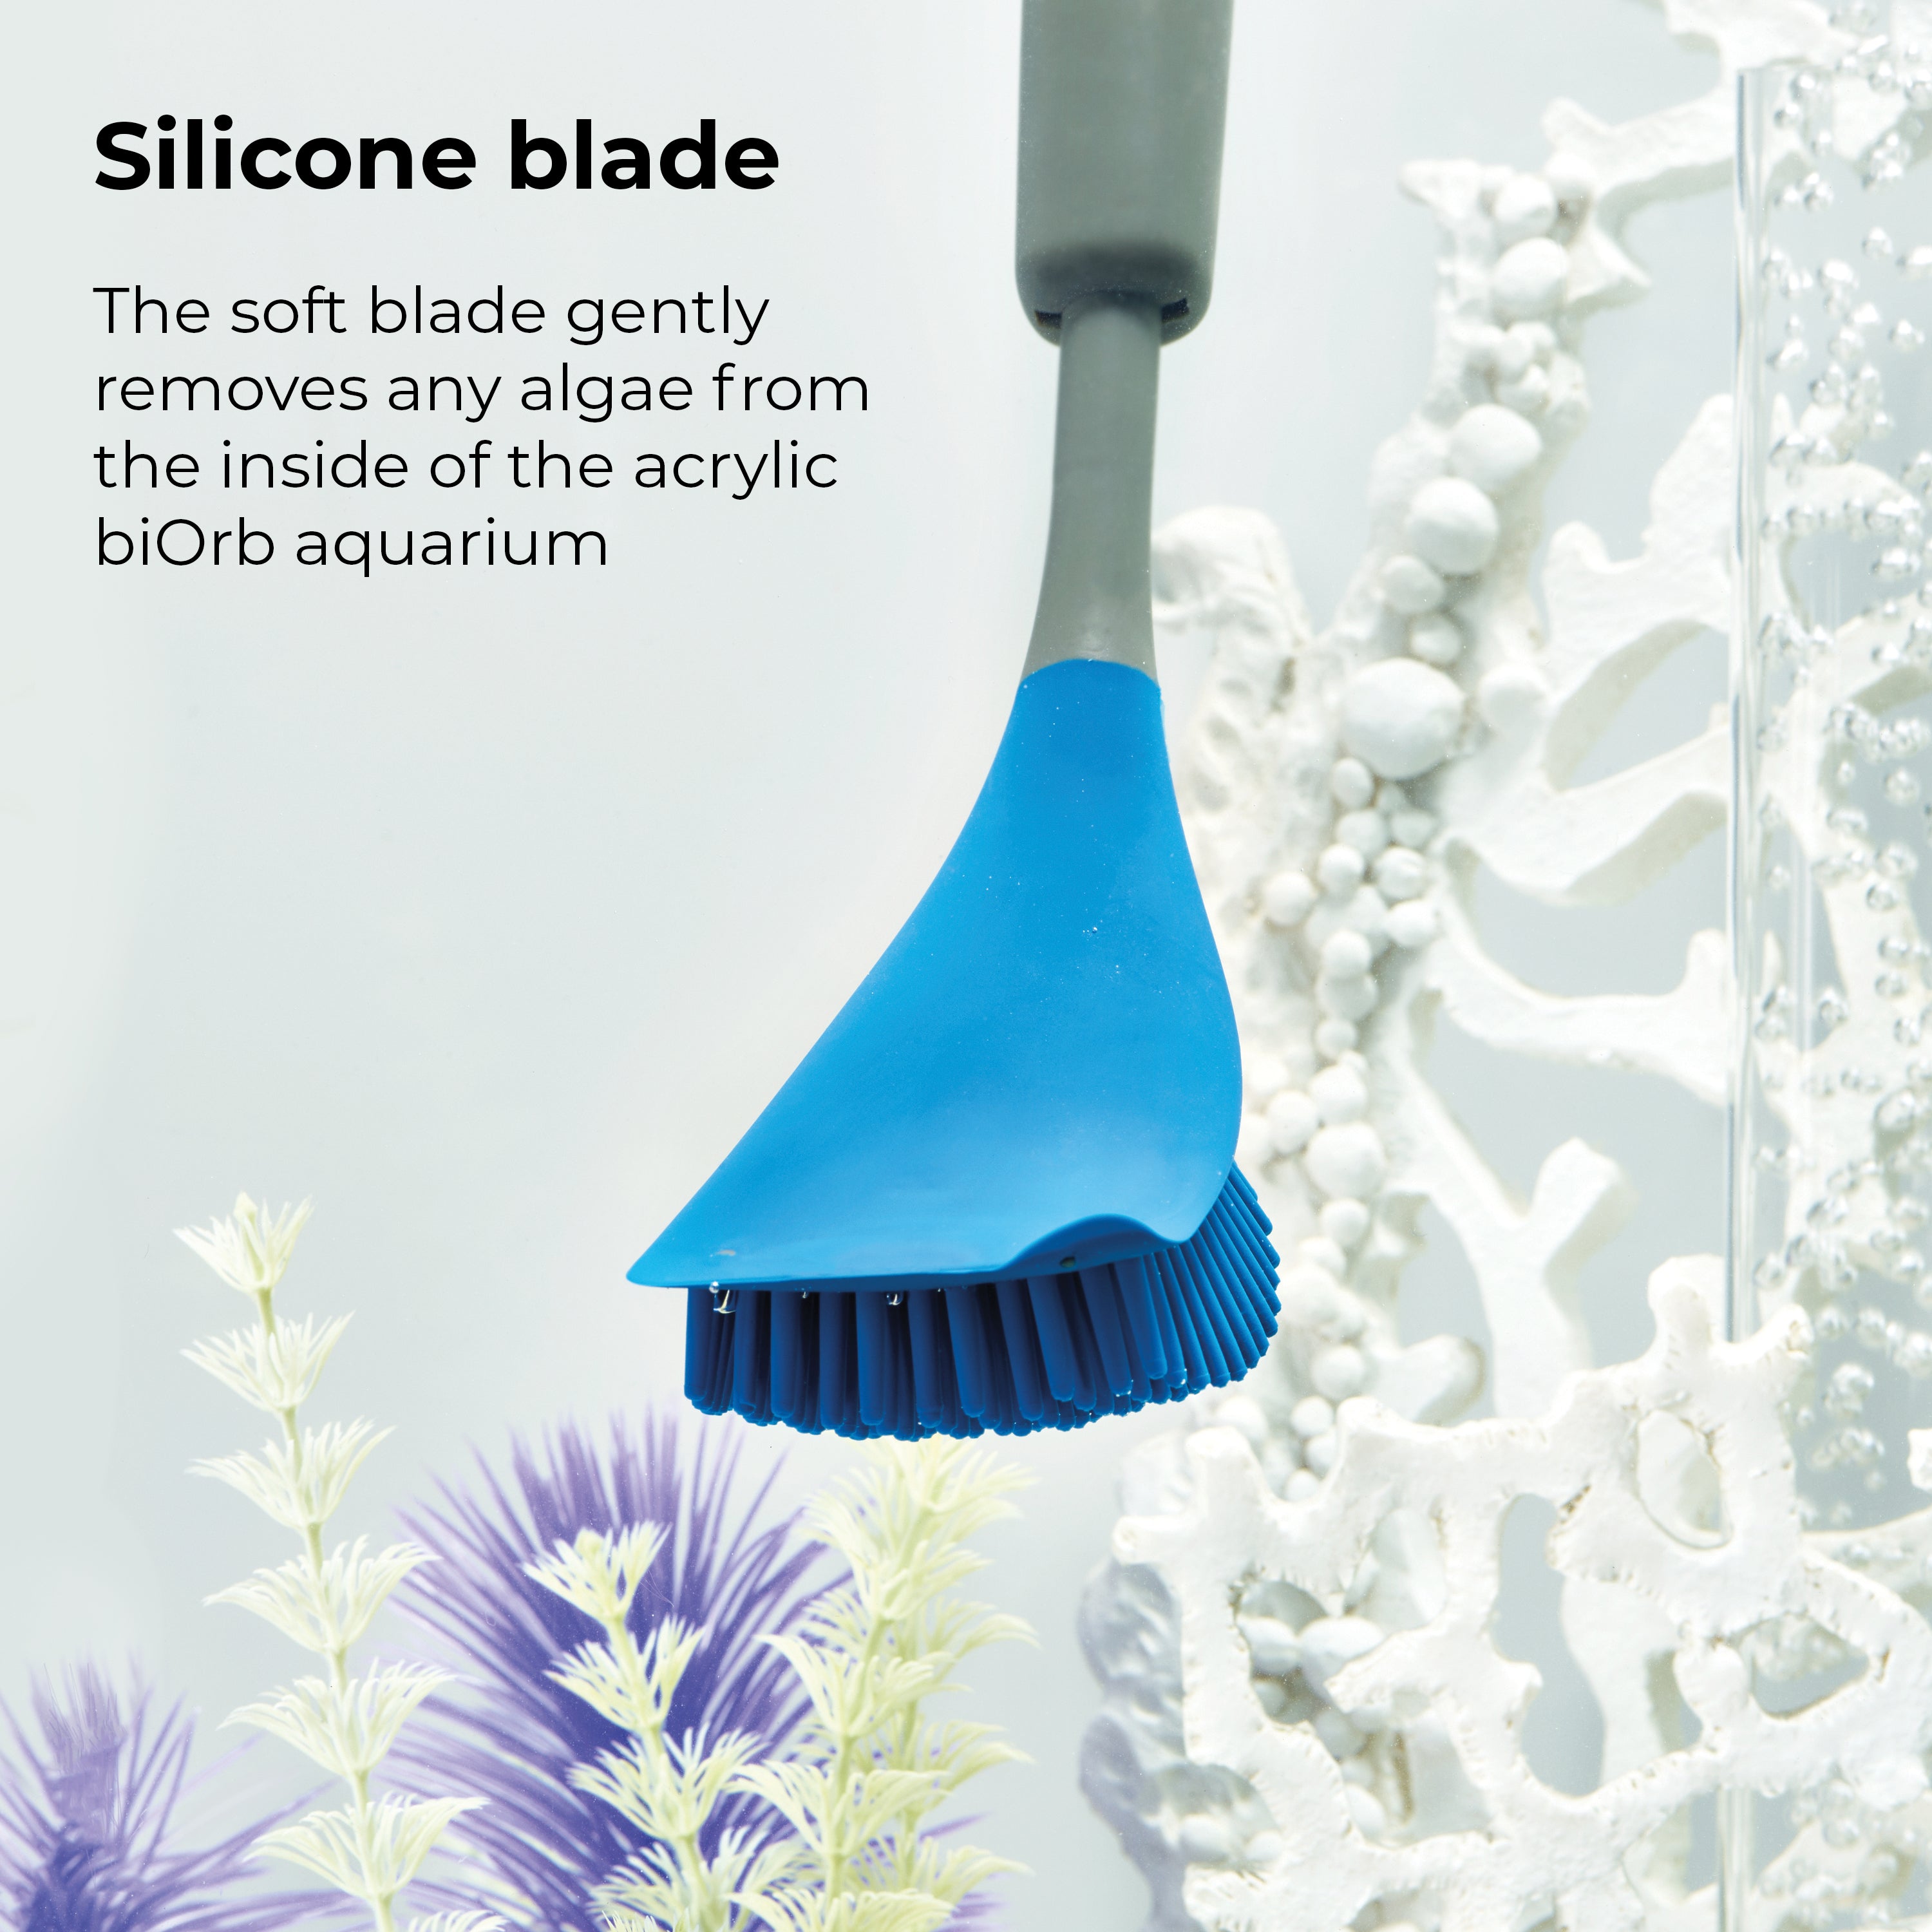 Multi-Cleaning Tool - Silicone blade